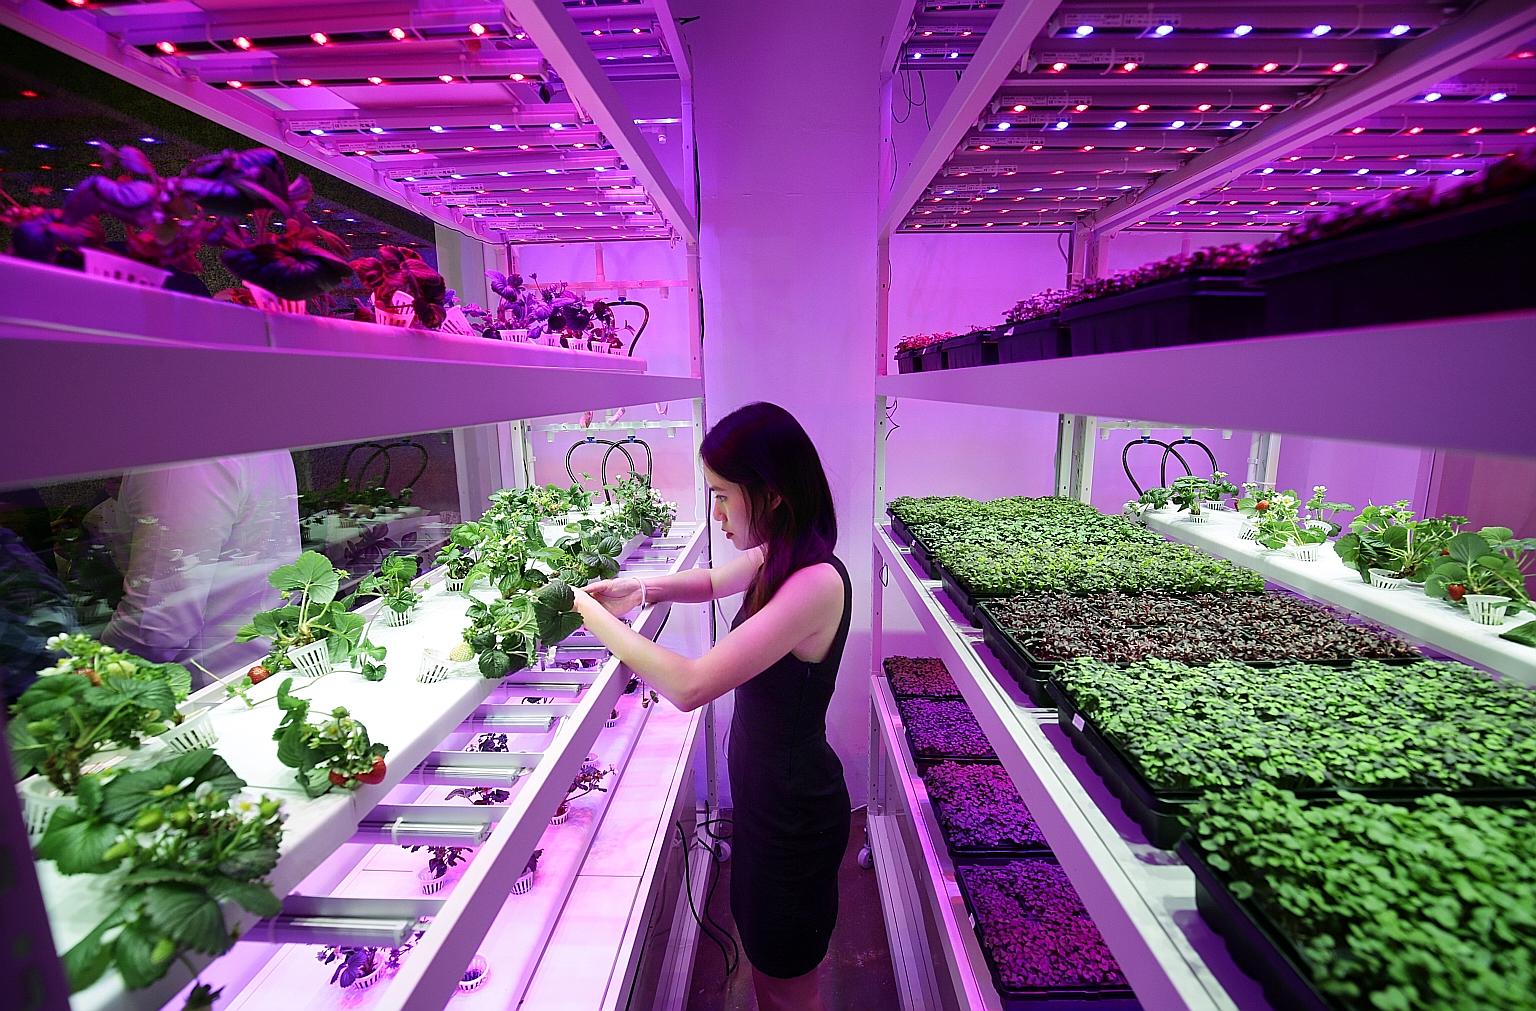 Urban Farming In Singapore Continues to Expand, Now With Strawberries